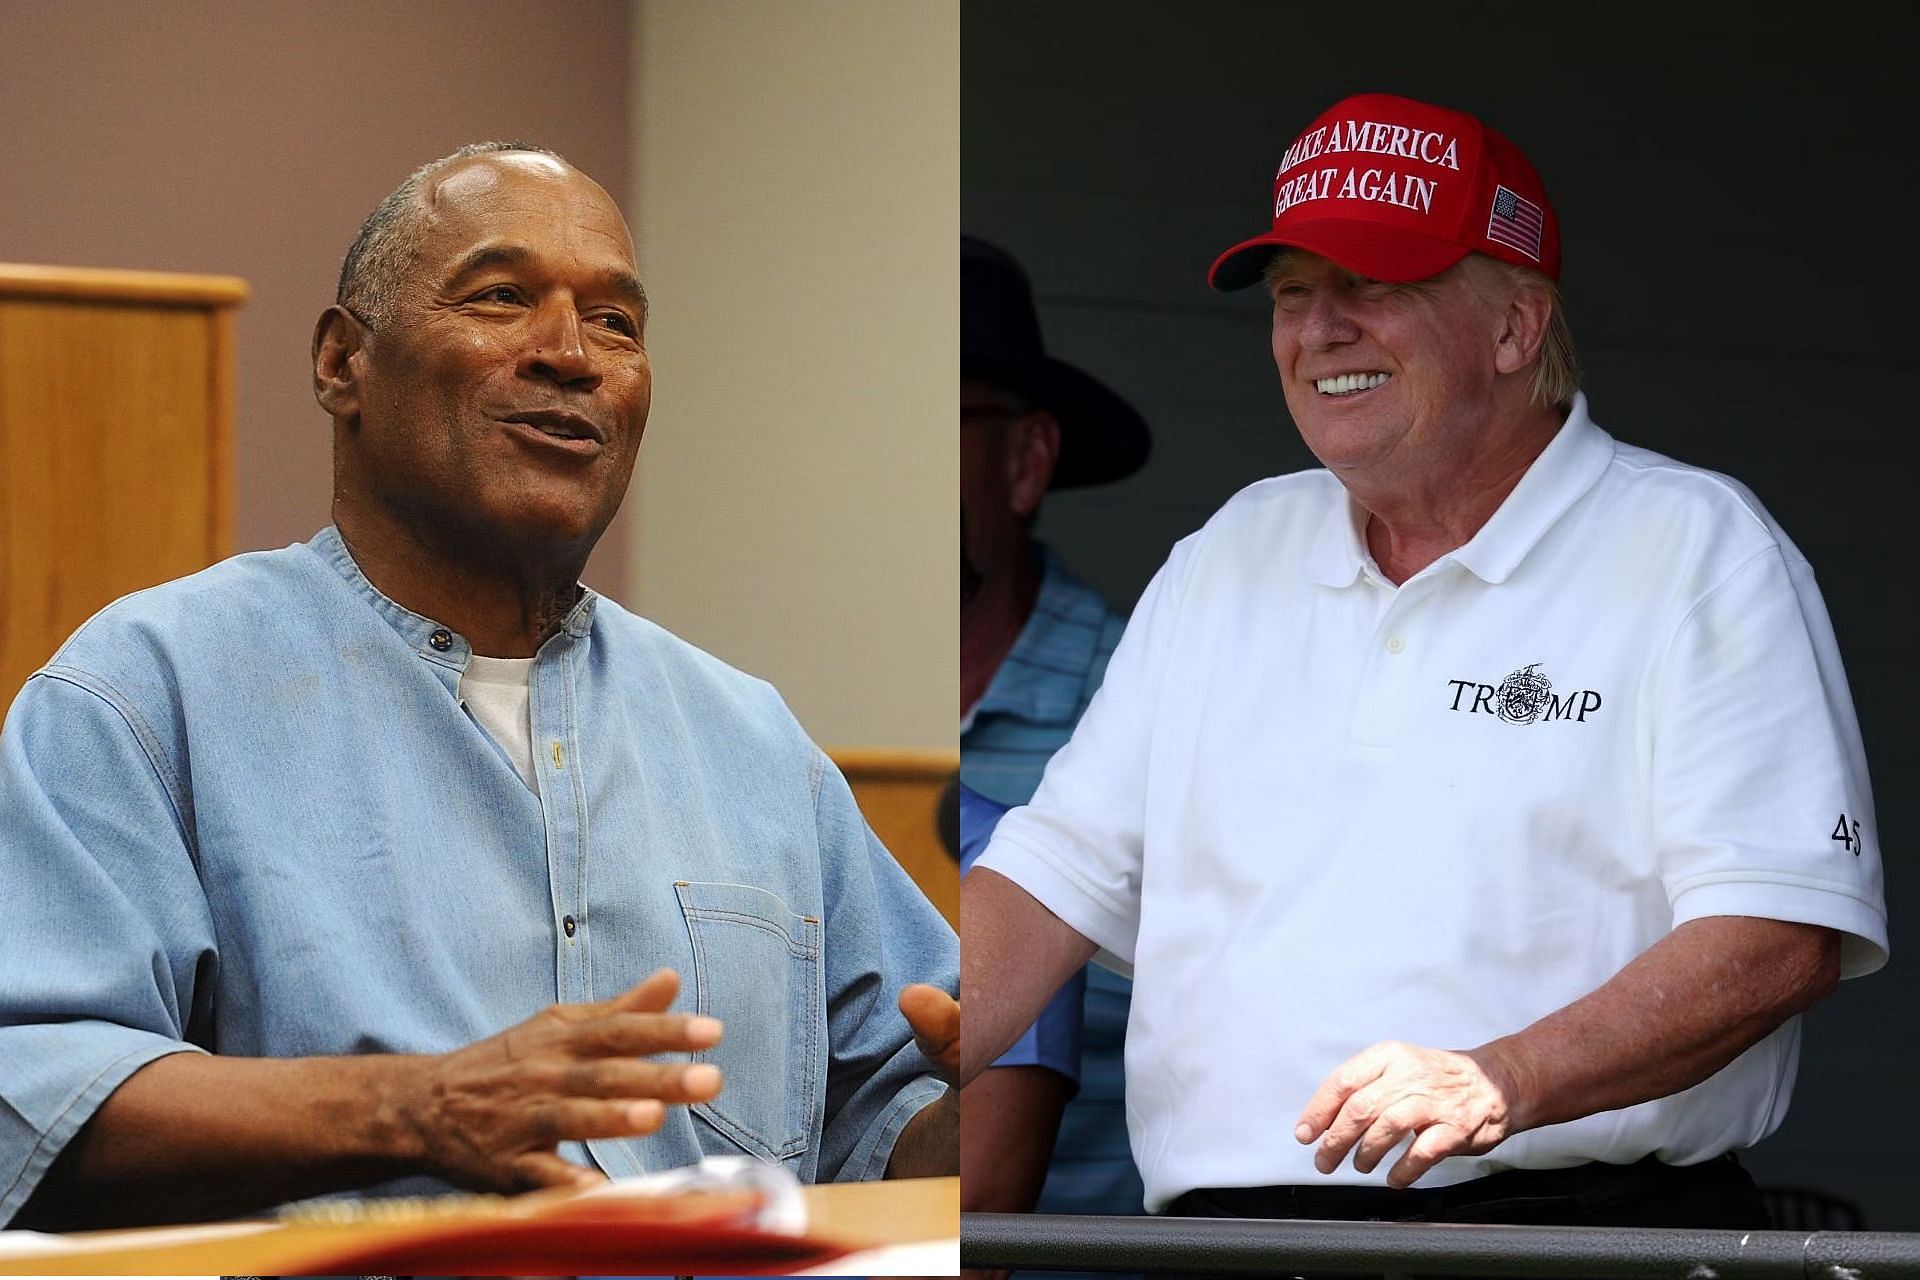 O.J. Simpson gives Donald Trump advice with former President facing federal criminal charges